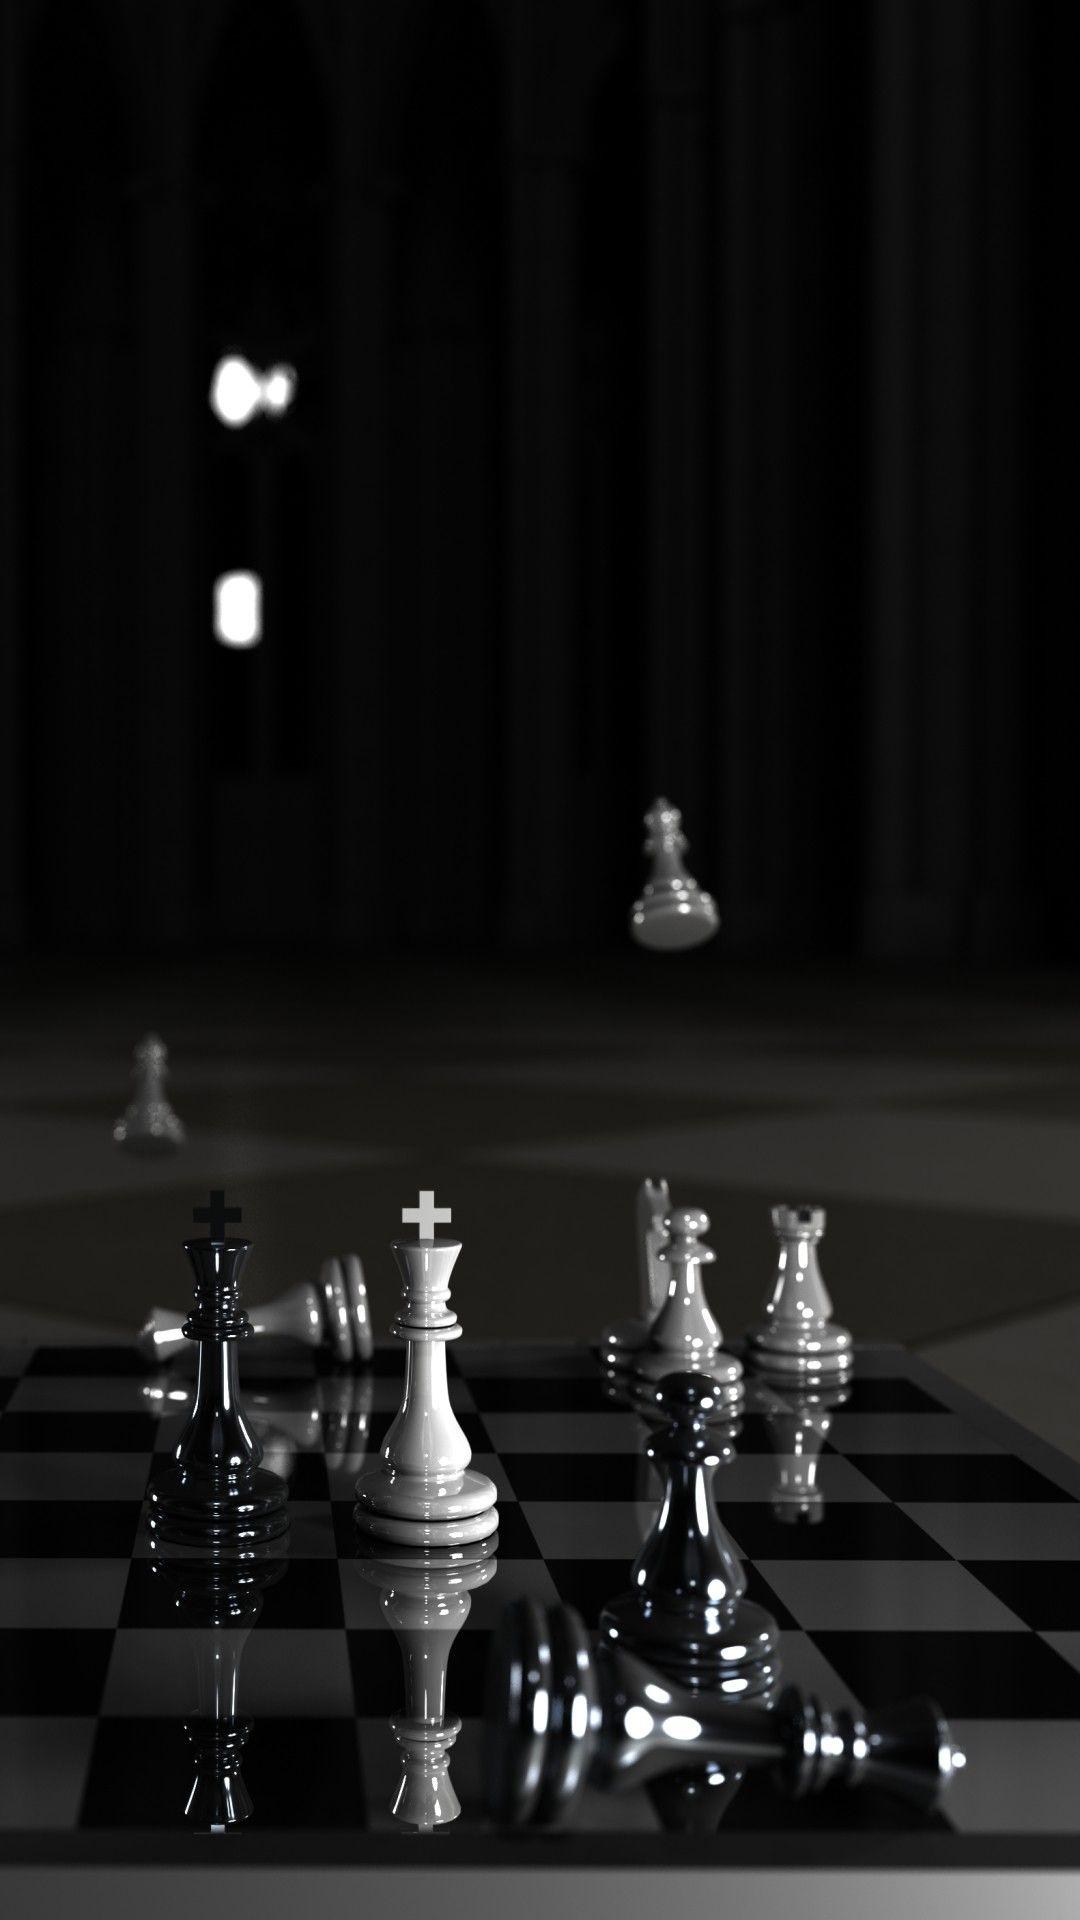 Black King Chess Piece Wallpapers Top Free Black King Chess Piece